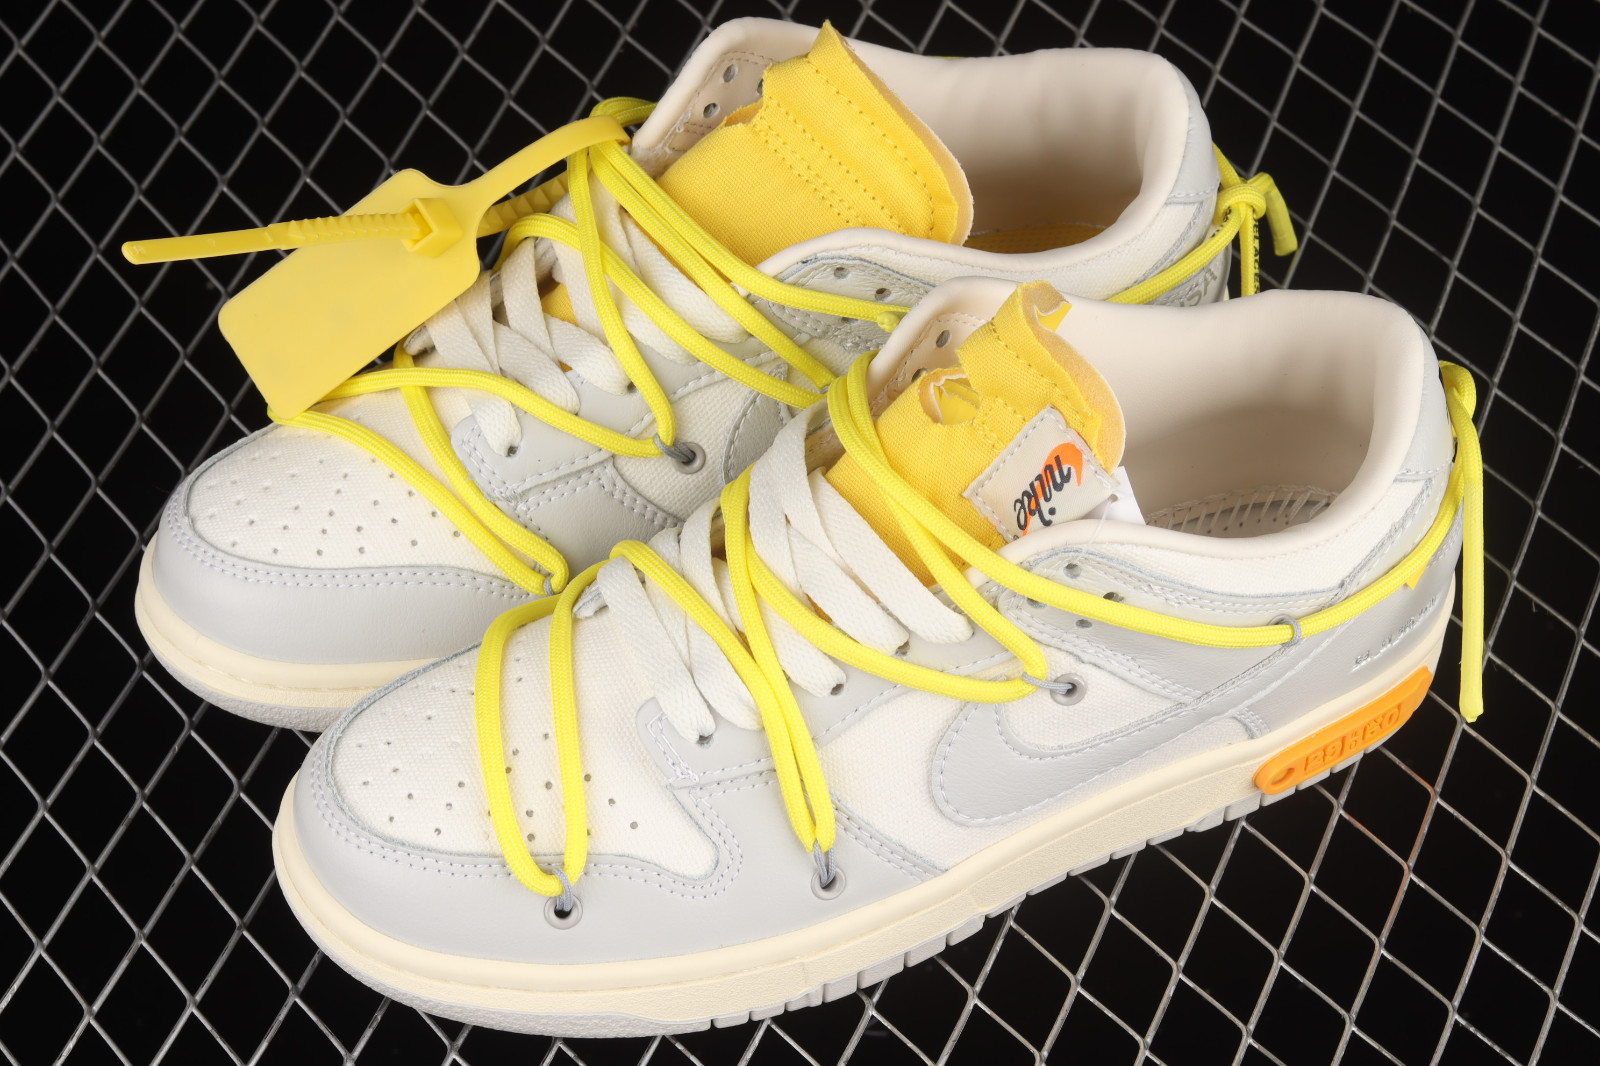 EP. 103 Nike X Off White Dunk Low 46 of 50 Review 